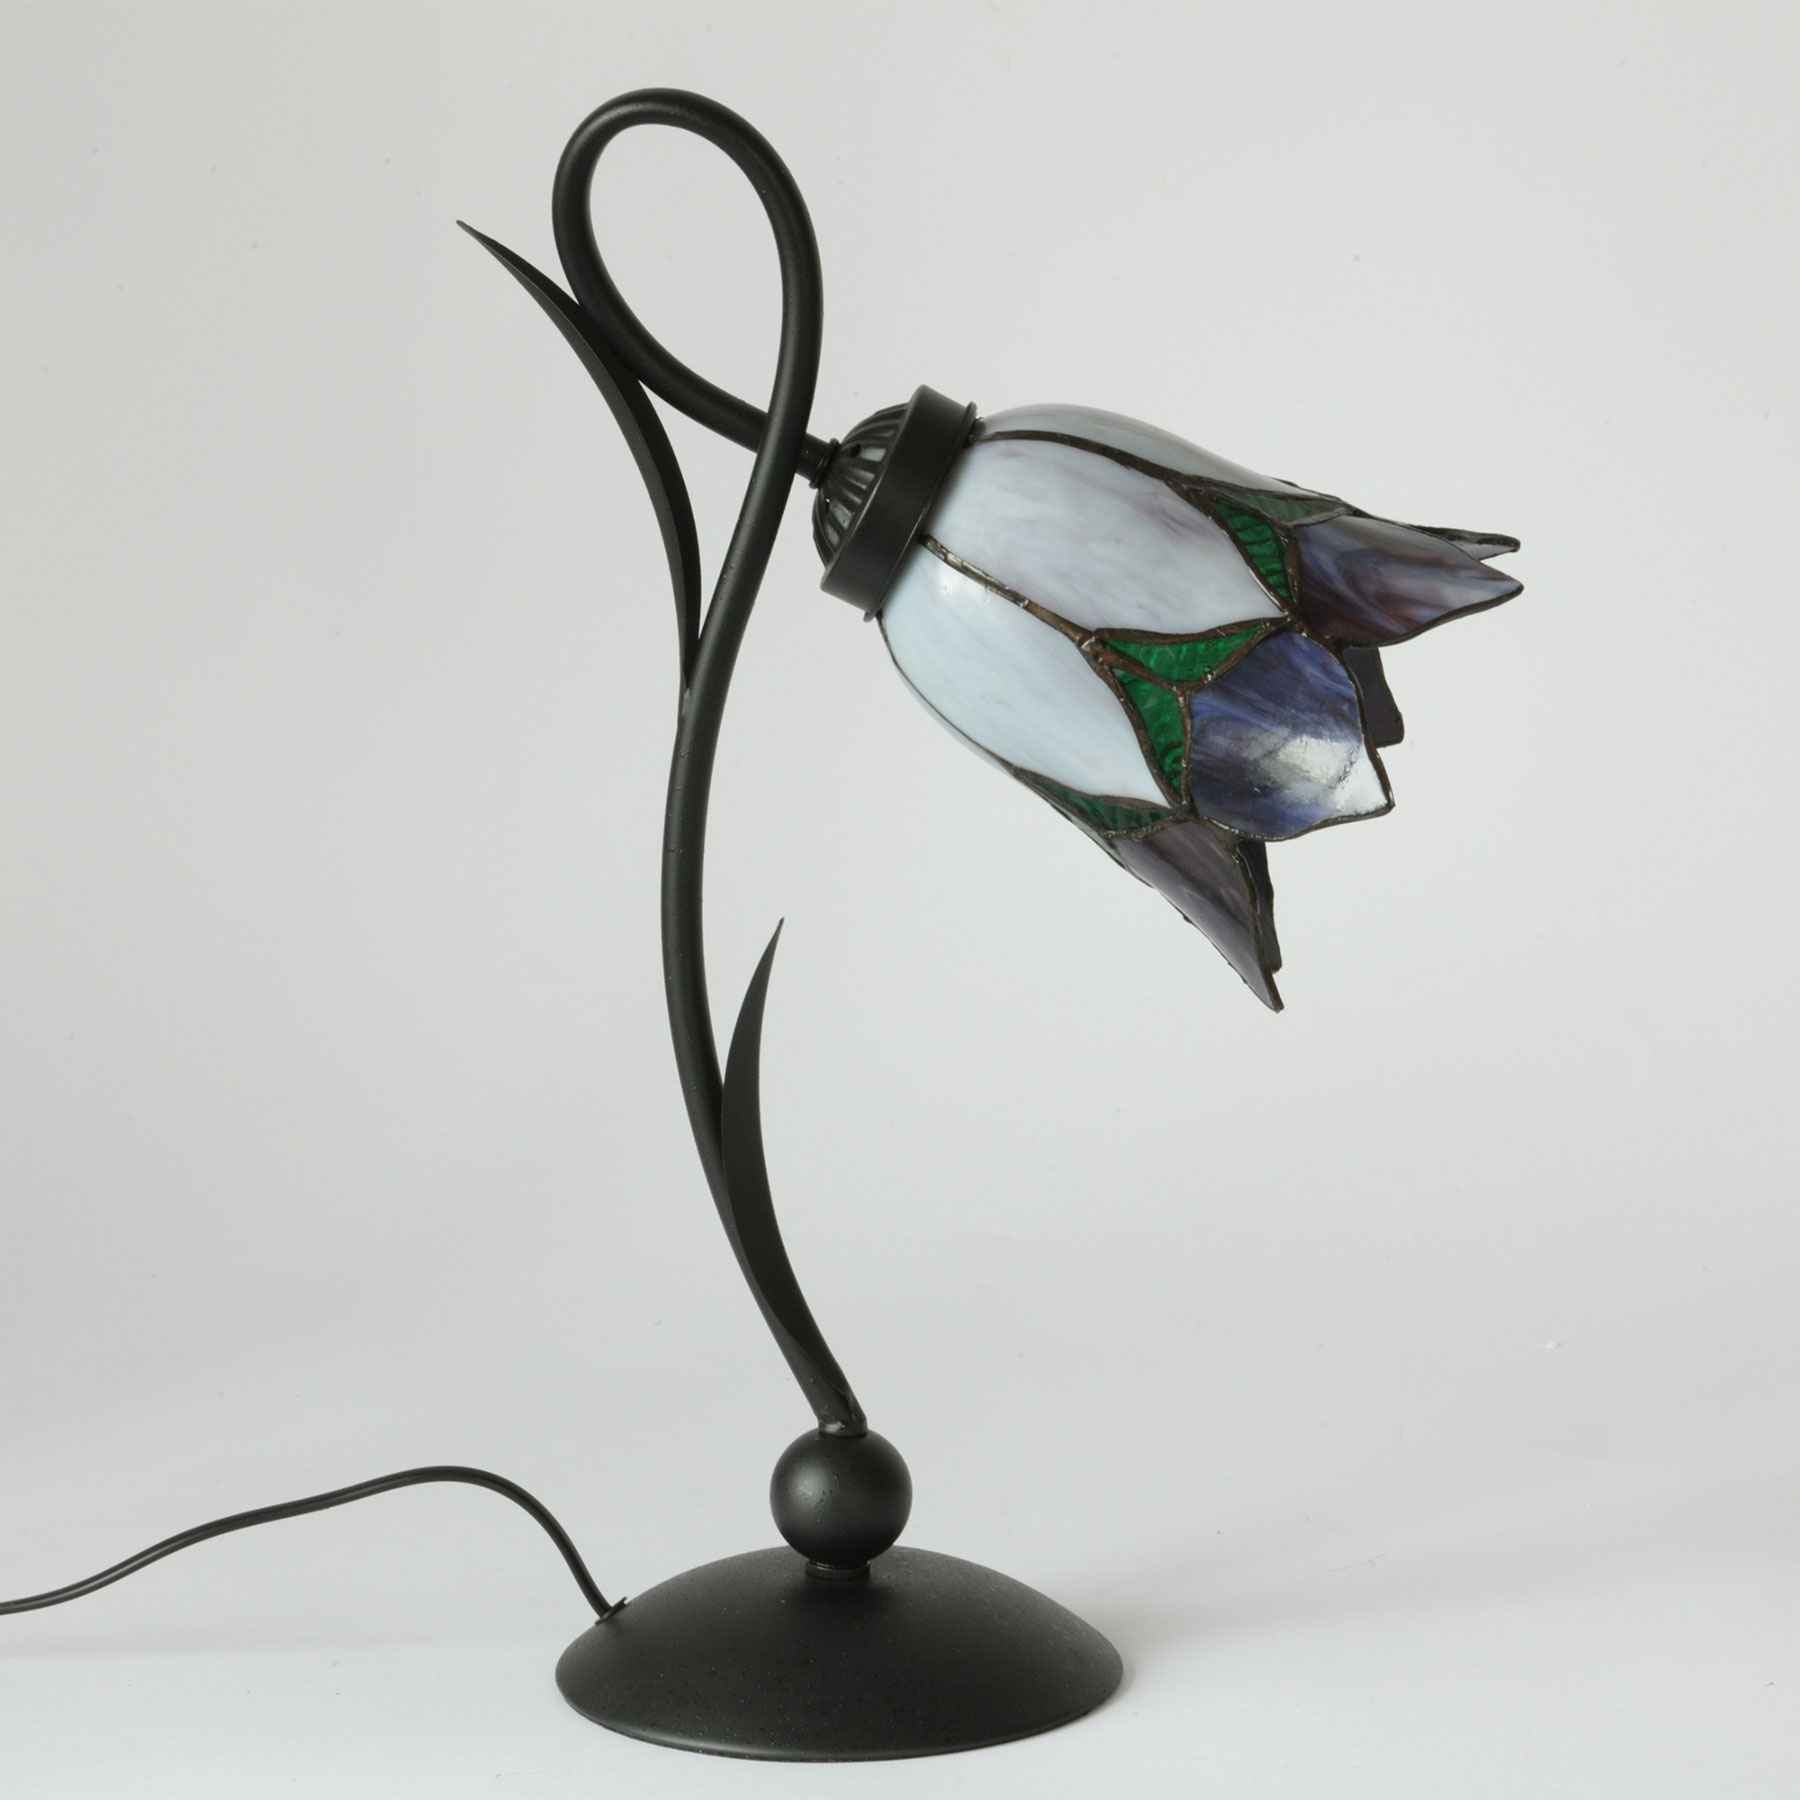 Tiffany table light with purple flower shade, Fig. 2